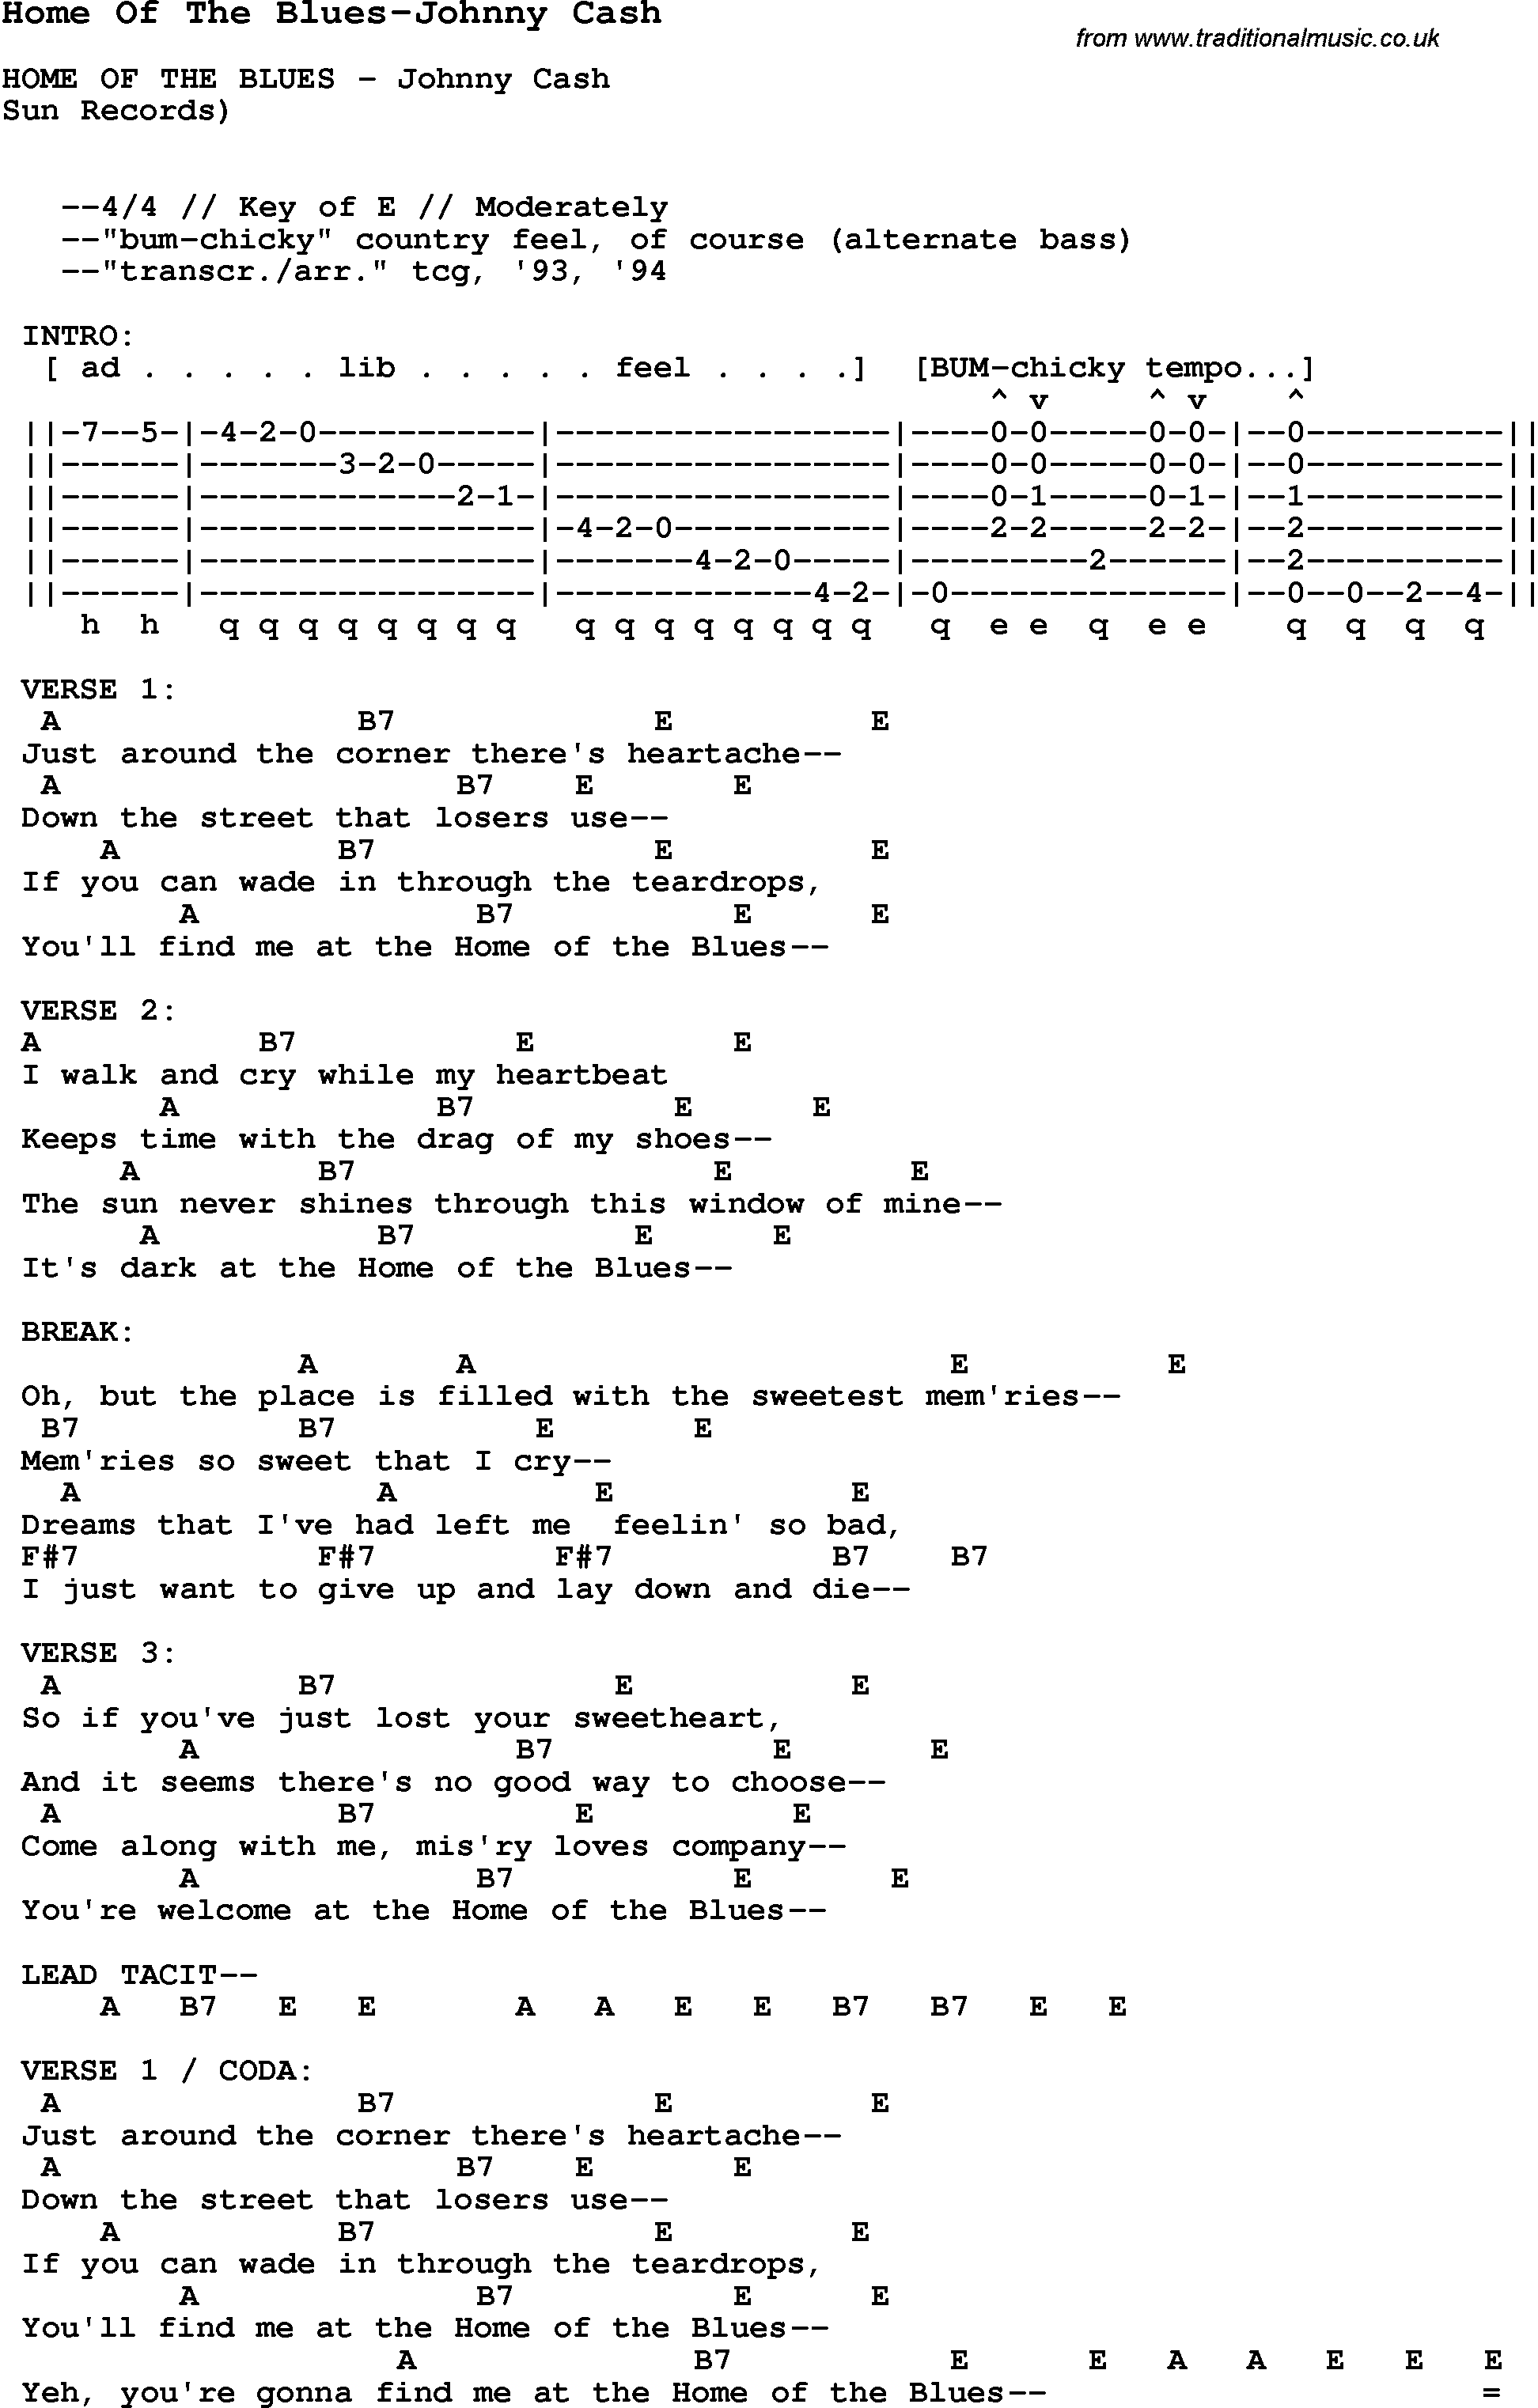 Blues Guitar Song, lyrics, chords, tablature, playing hints for Home Of The Blues-Johnny Cash